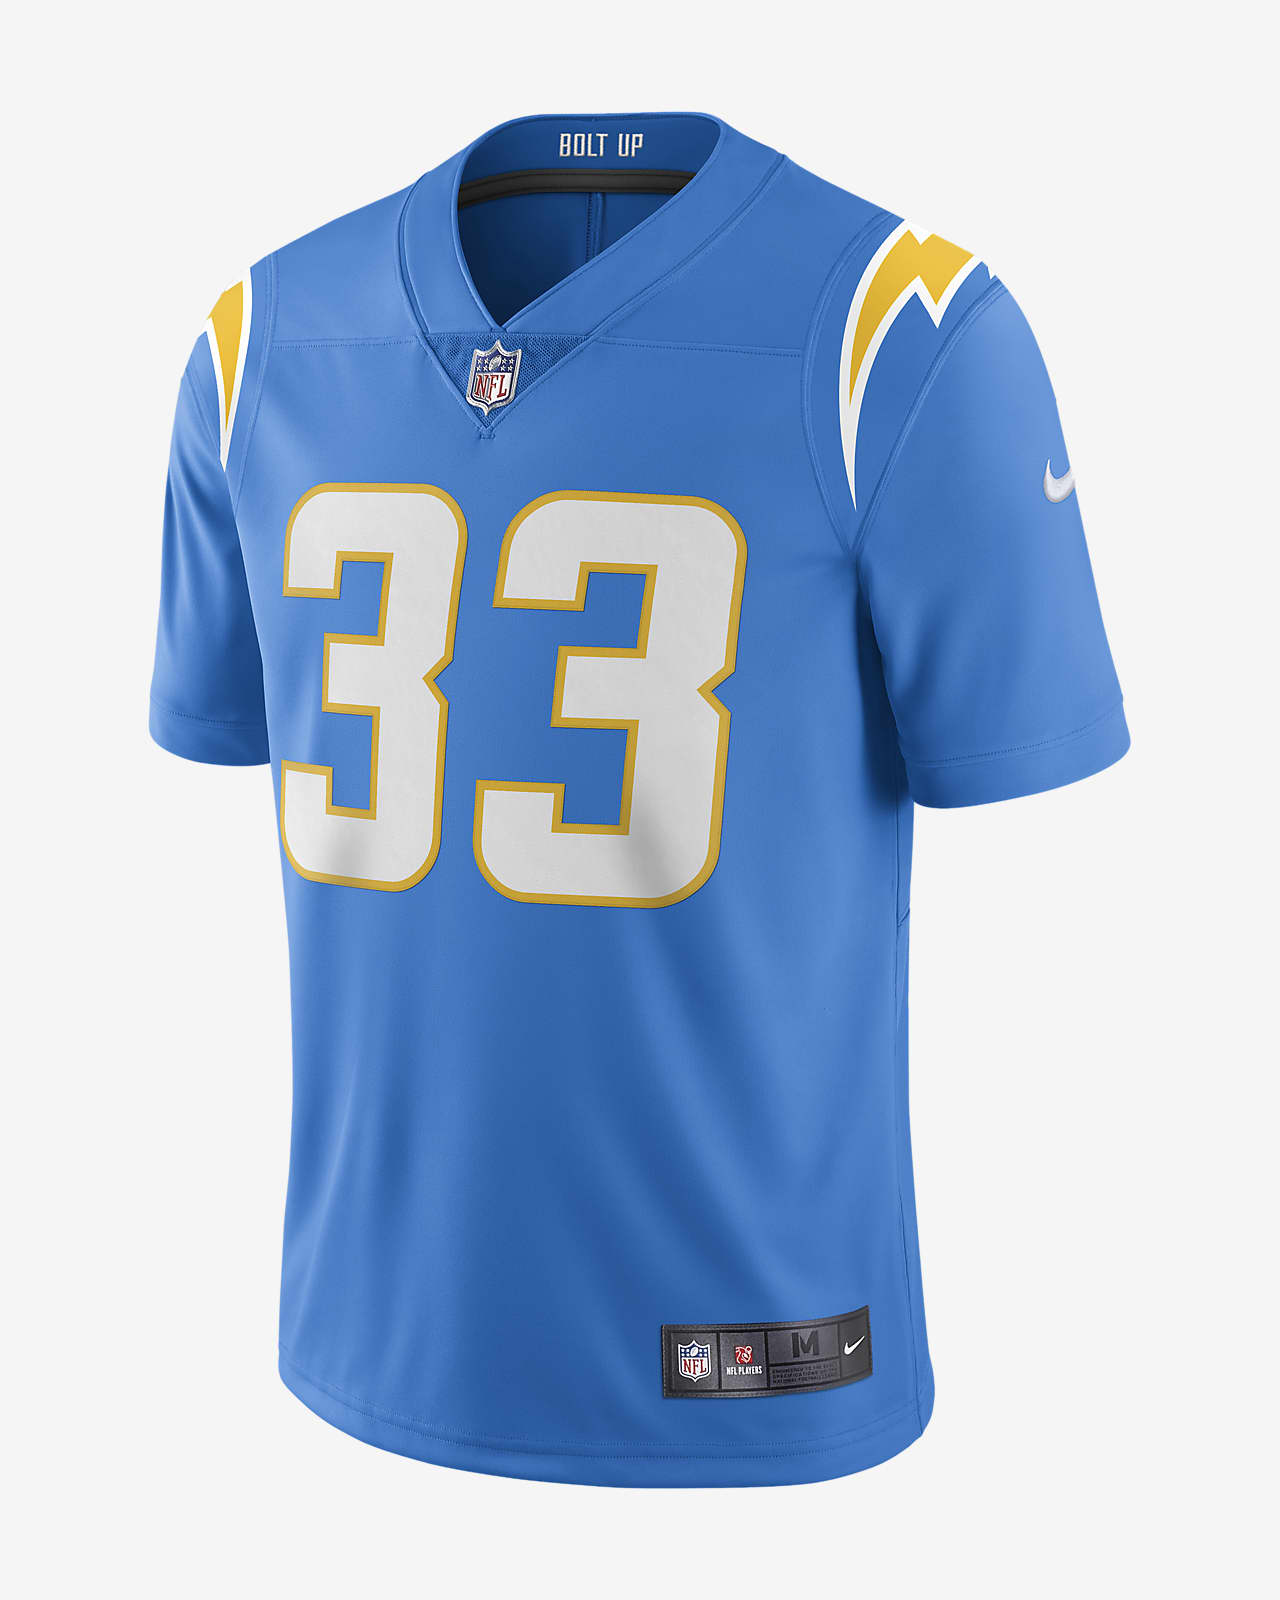 NFL Los Angeles Chargers Vapor 